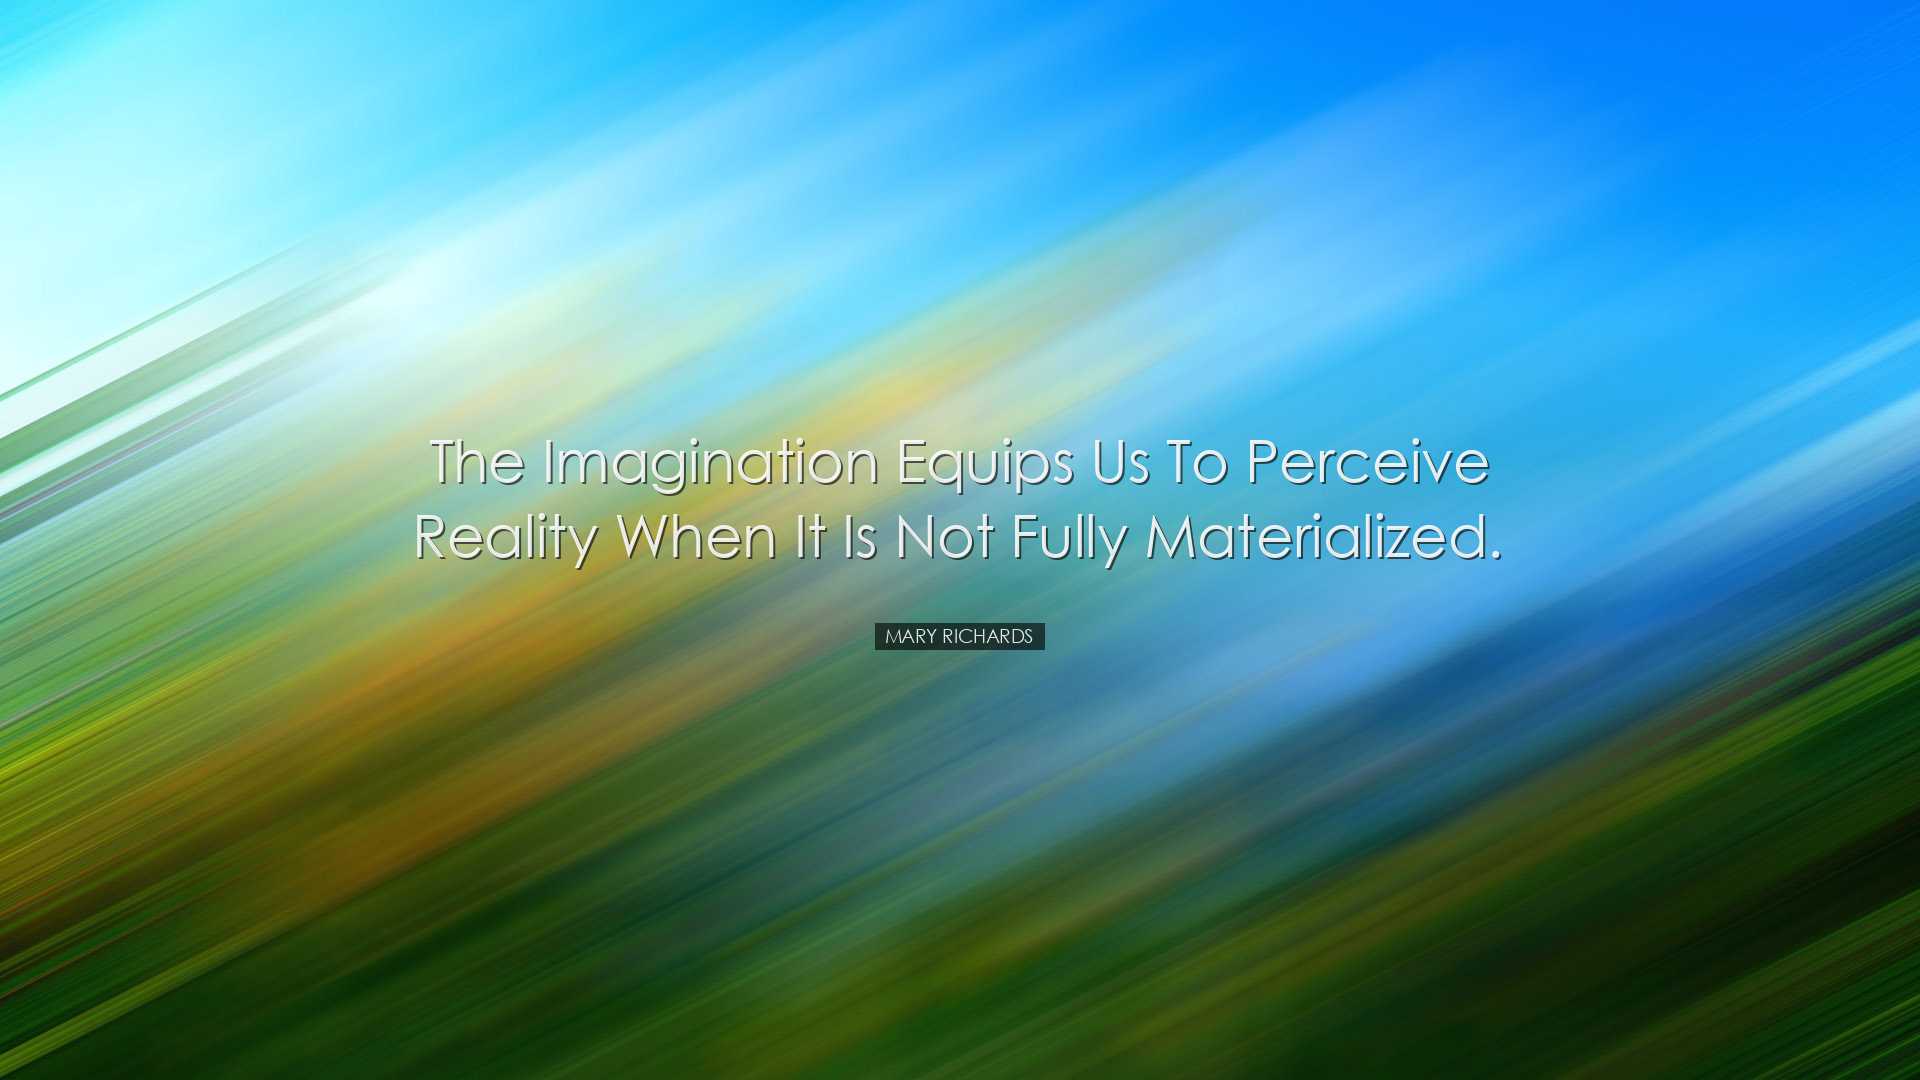 The imagination equips us to perceive reality when it is not fully